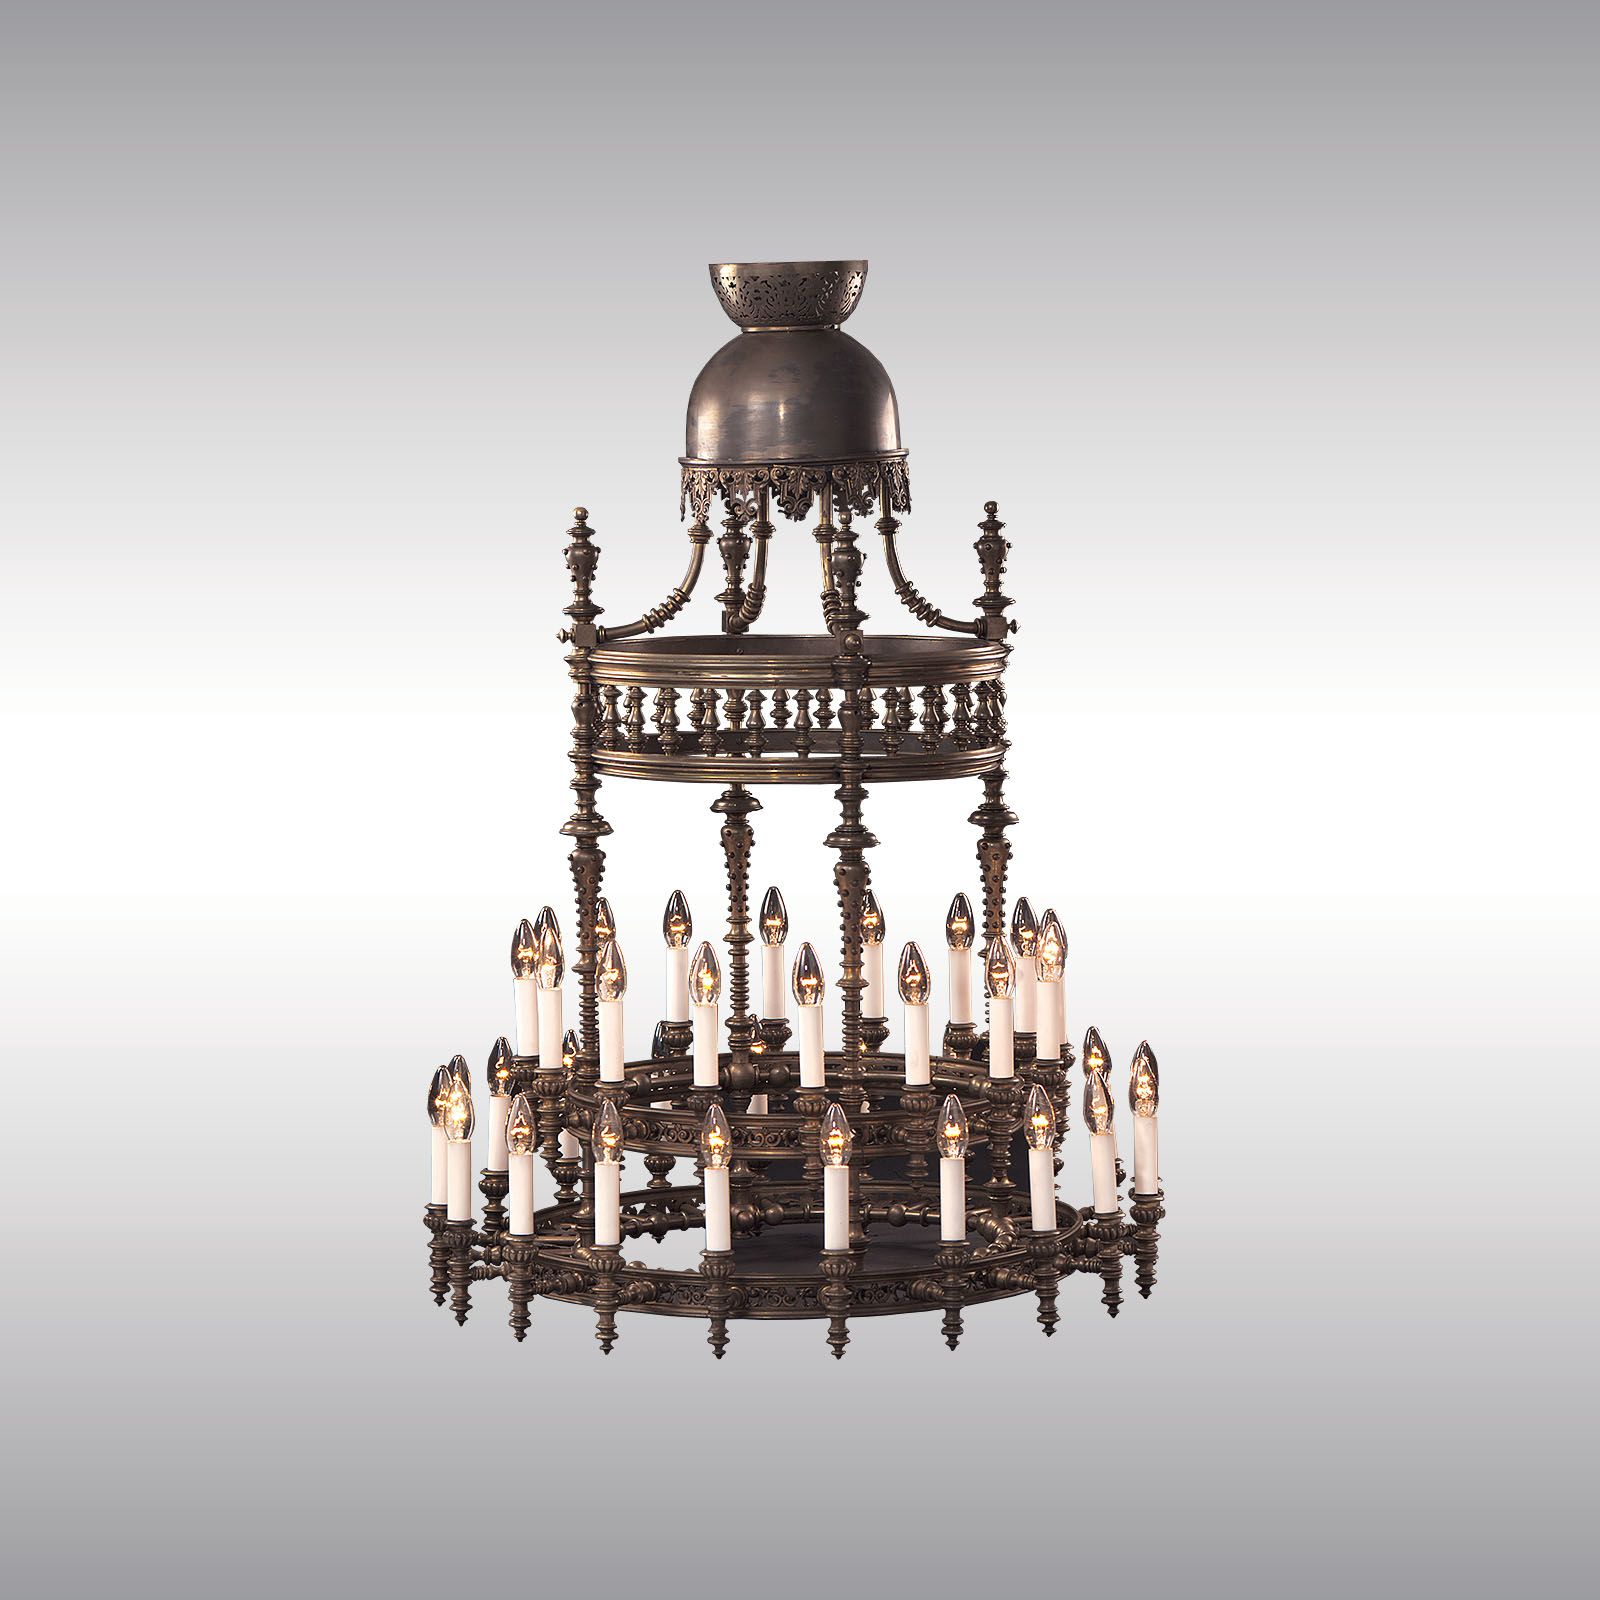 WOKA LAMPS VIENNA - OrderNr.: 70003|Otto Wagner privat Dining Chandelier - Design: Otto Wagner